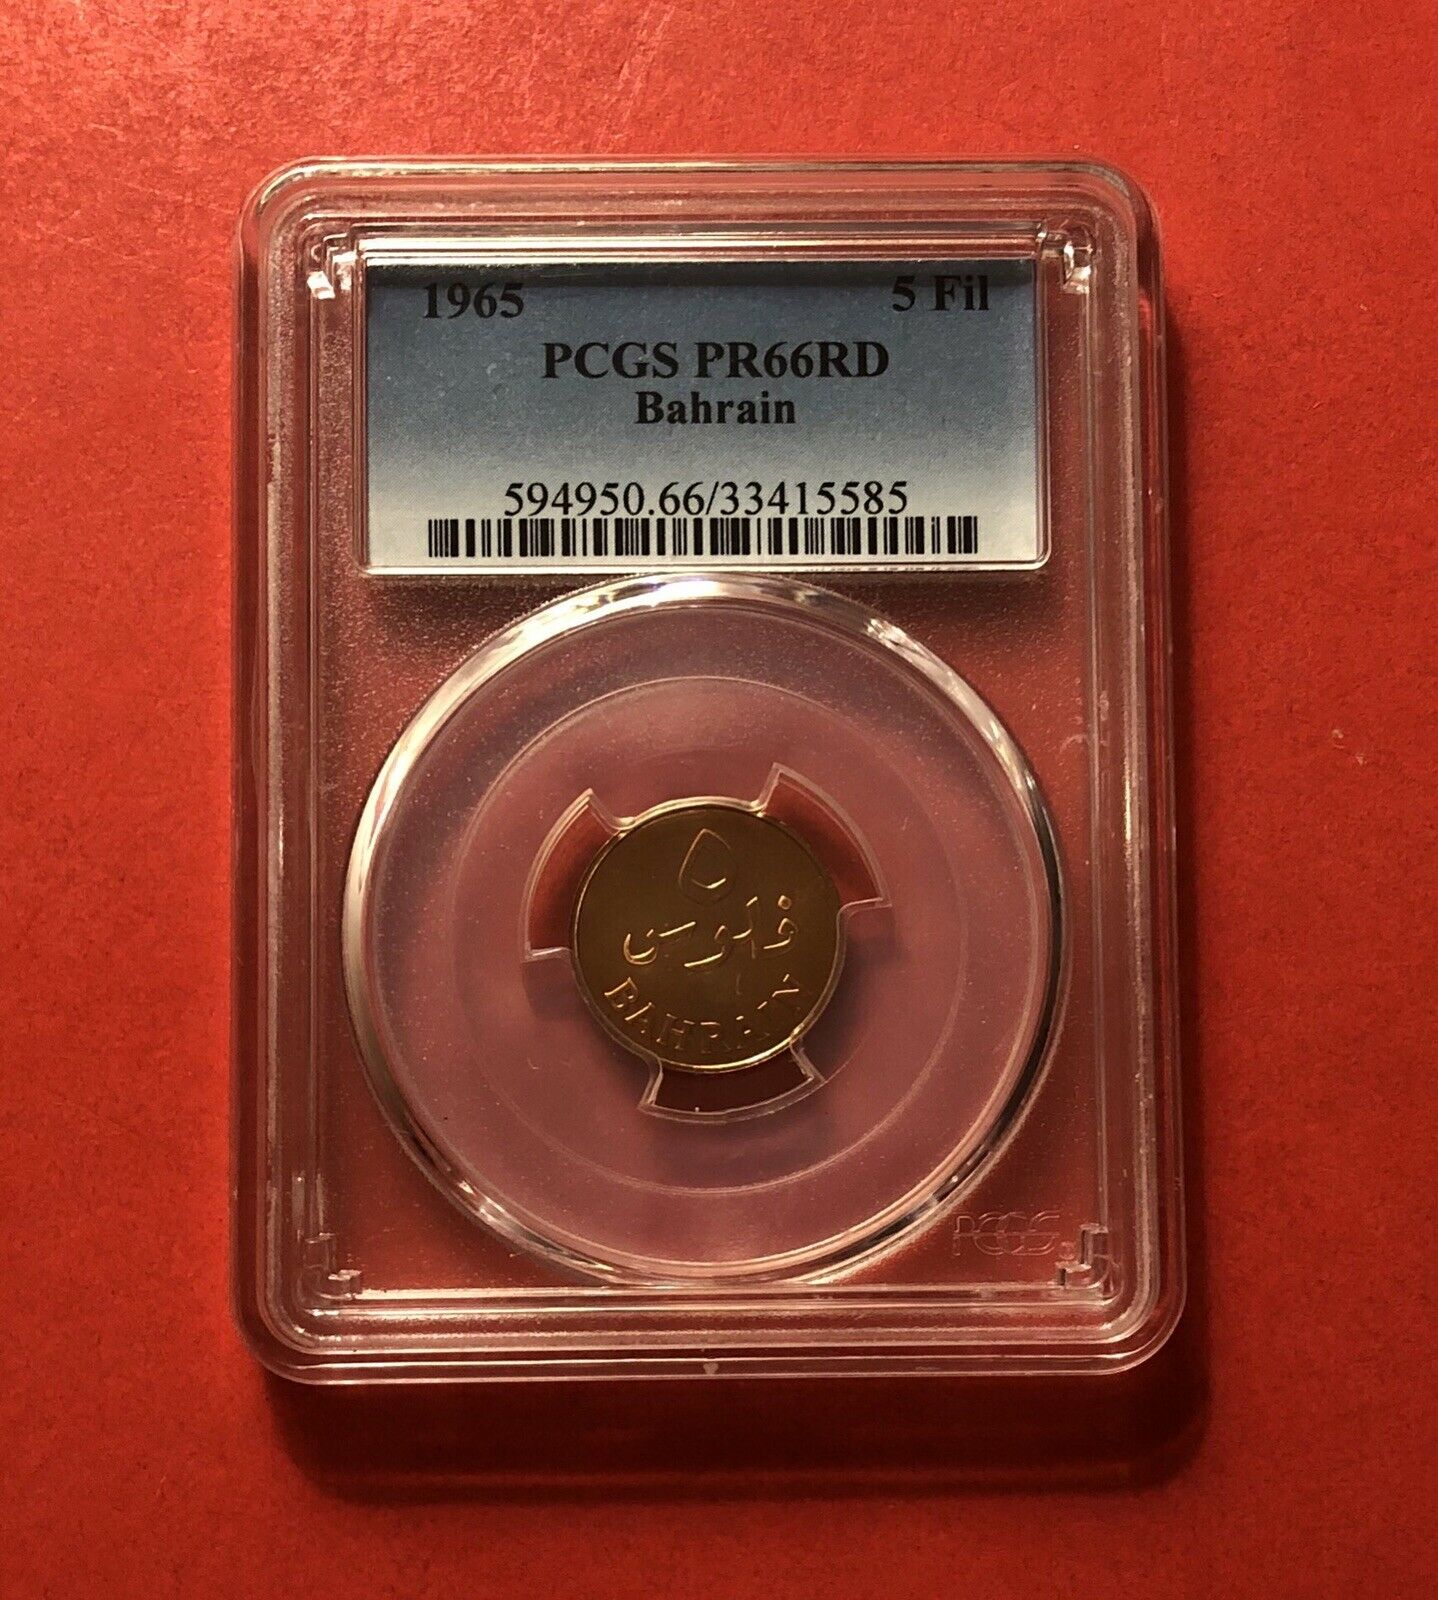 1965-bahrain-1 Proof Coin (5 Fils) ,graded By Pcgs Pr 66.